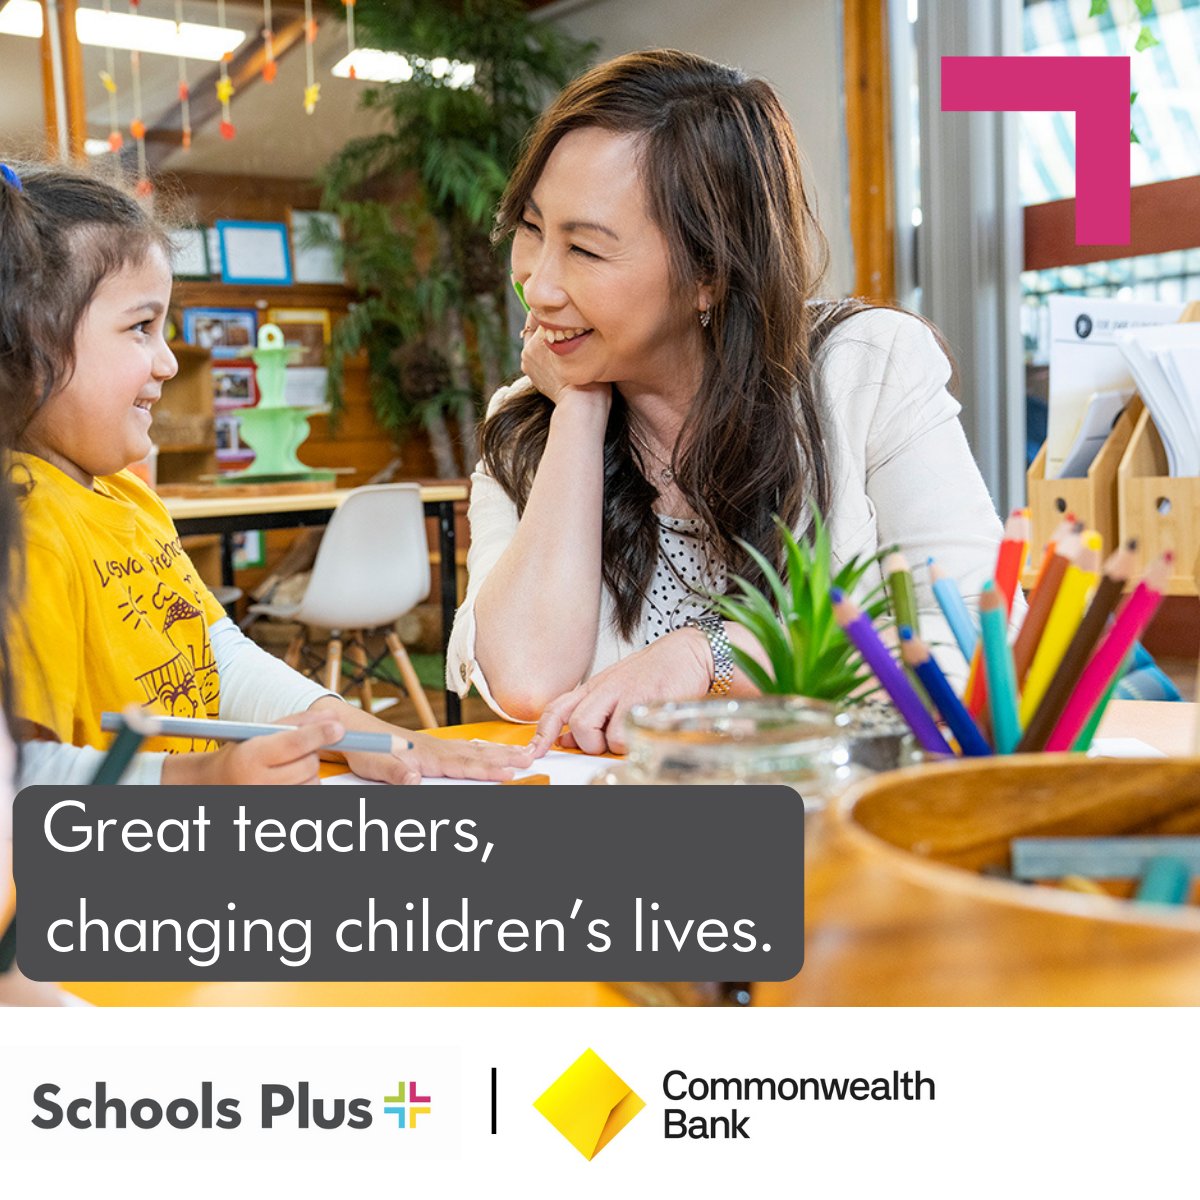 Great teachers change children’s lives ✨ @CommBankTeaching Awards. Nominate an outstanding teacher to receive a $40,000 Fellowship or $10,000 Early Career Teacher Scholarship, supported by @salesforce Visit schoolsplus.org.au/awards/